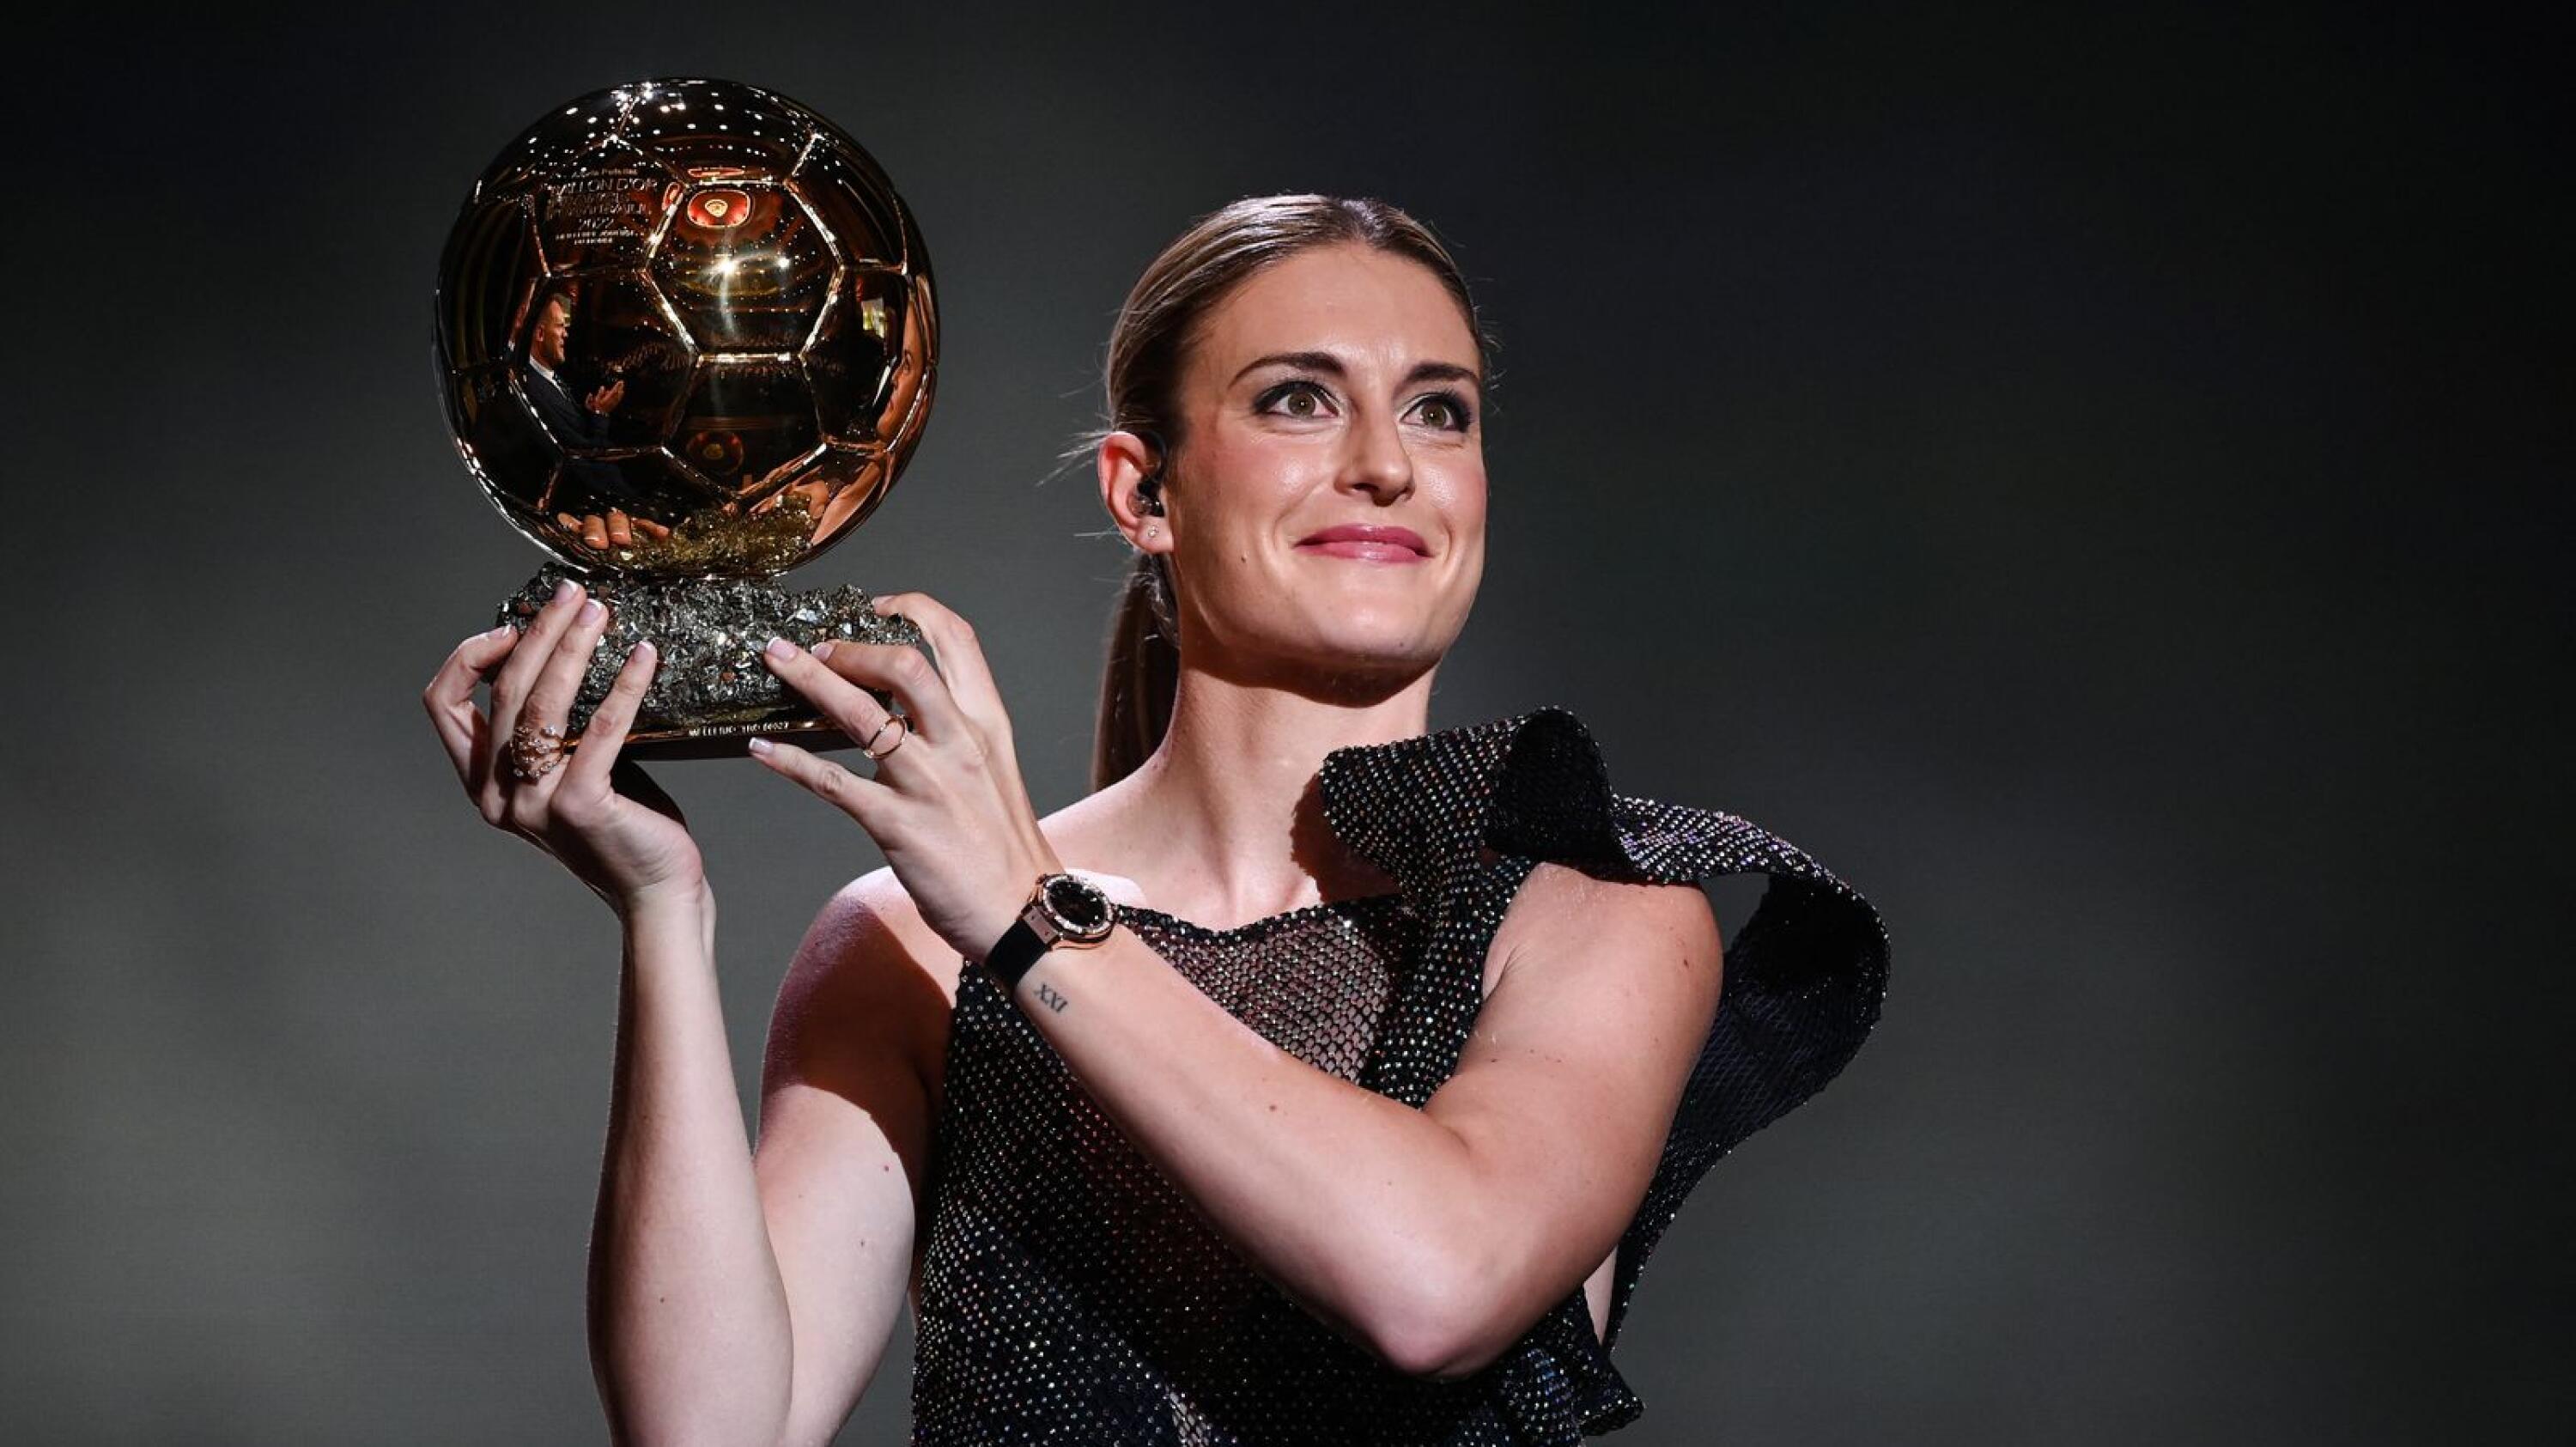 FC Barcelona's Spanish midfielder Alexia Putellas receives her second Woman Ballon d'Or award during the 2022 Ballon d'Or France Football award ceremony at the Theatre du Chatelet in Paris on Monday